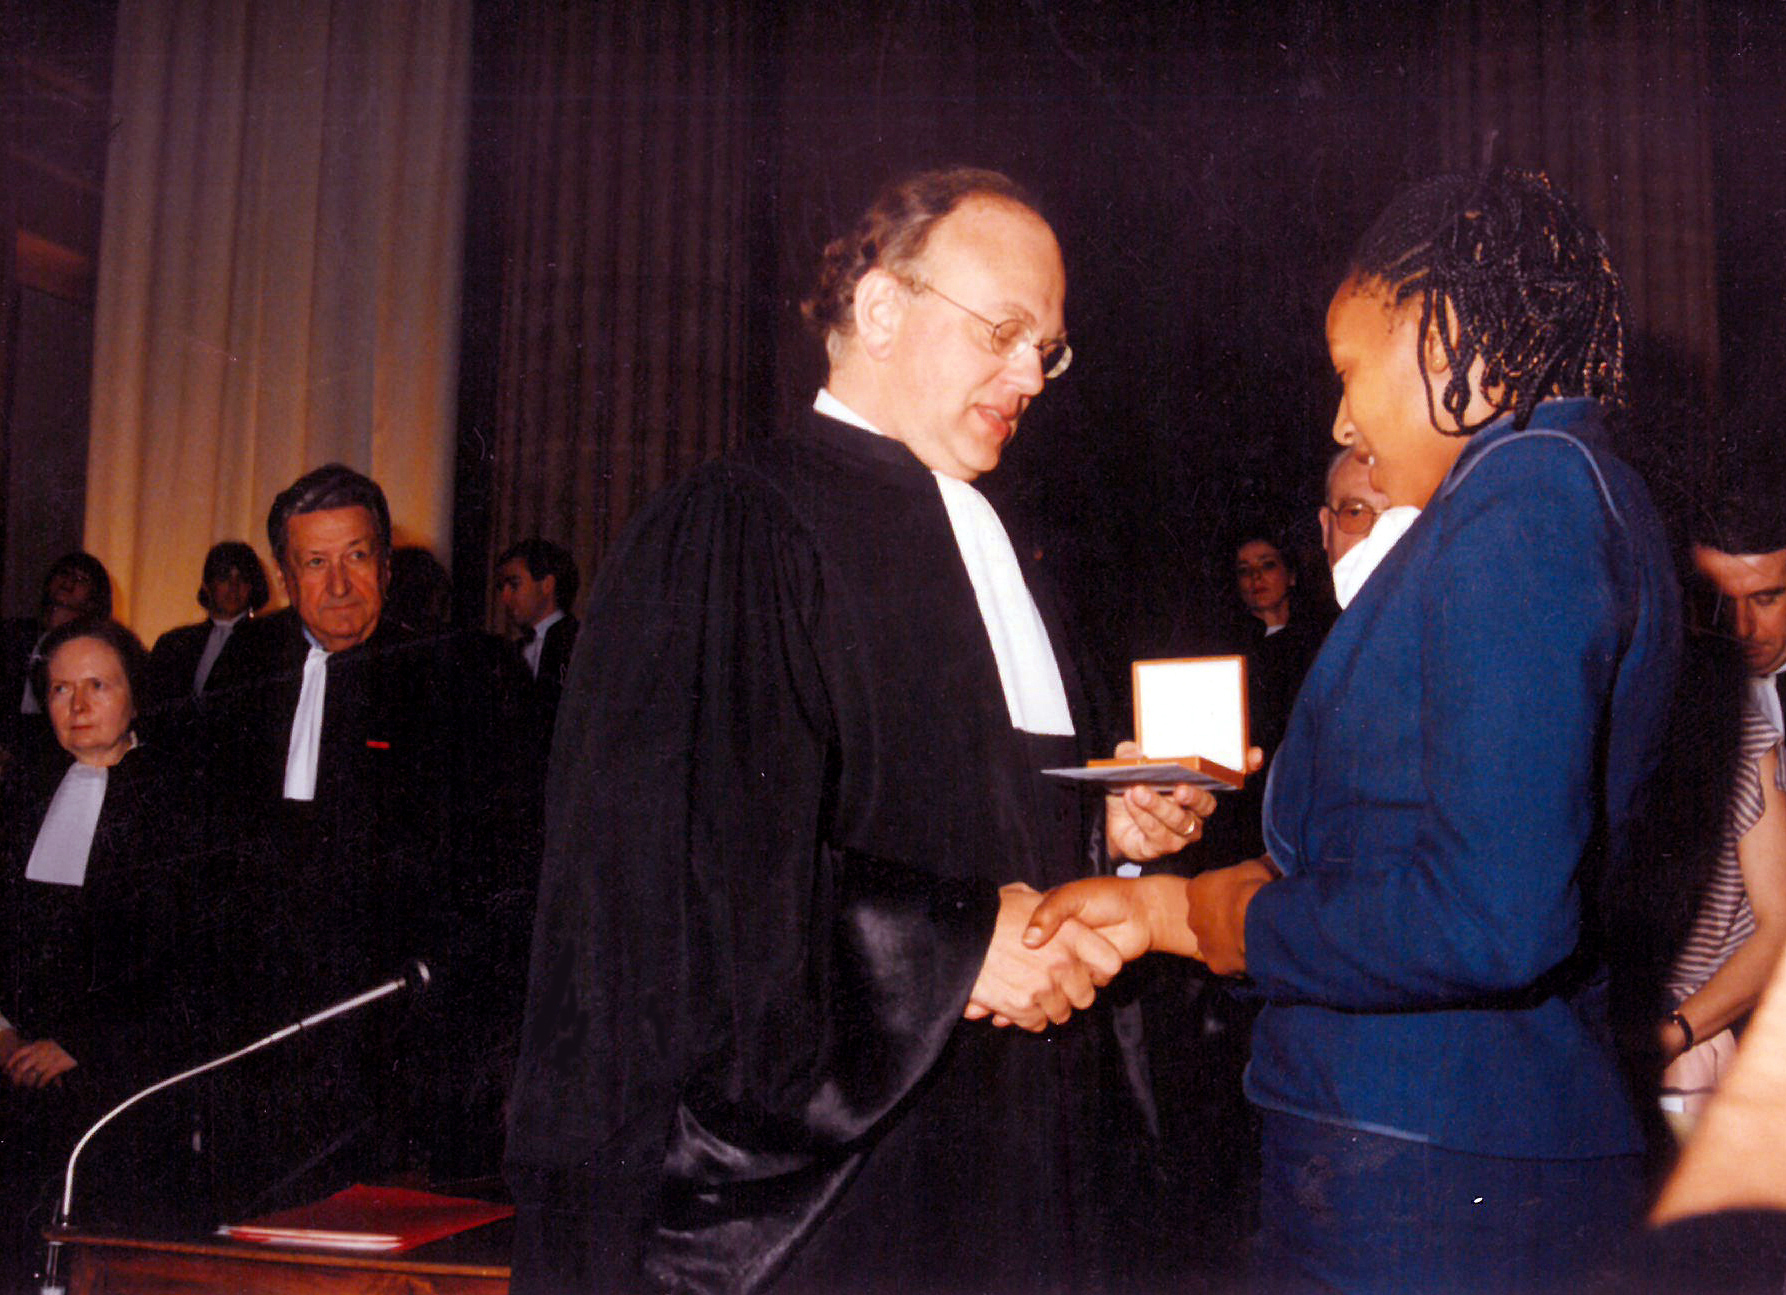 April 27th, 1985 - HRIBB President Bertrand FAVREAU awards the first Ludovic-Trarieux Prize to Zenani Mandela, while her father has been in jail for 23 years in South-Africa.